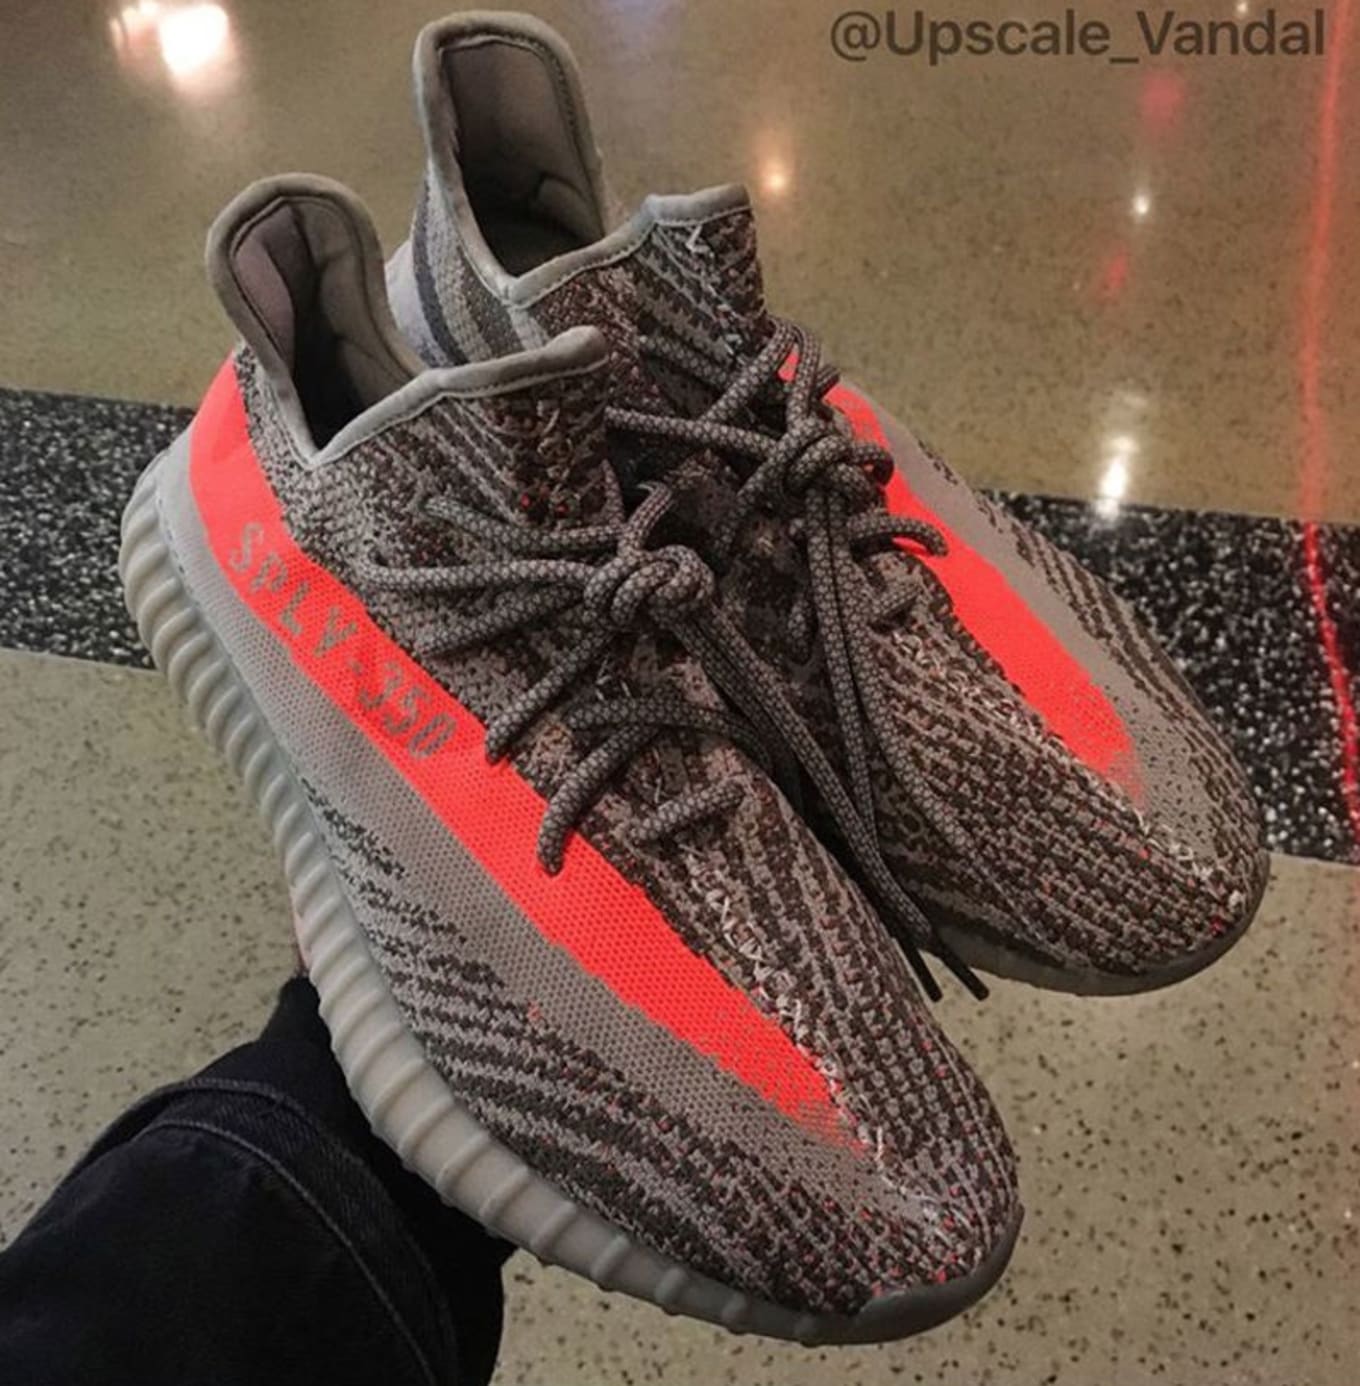 what does sply 350 stand for on yeezys